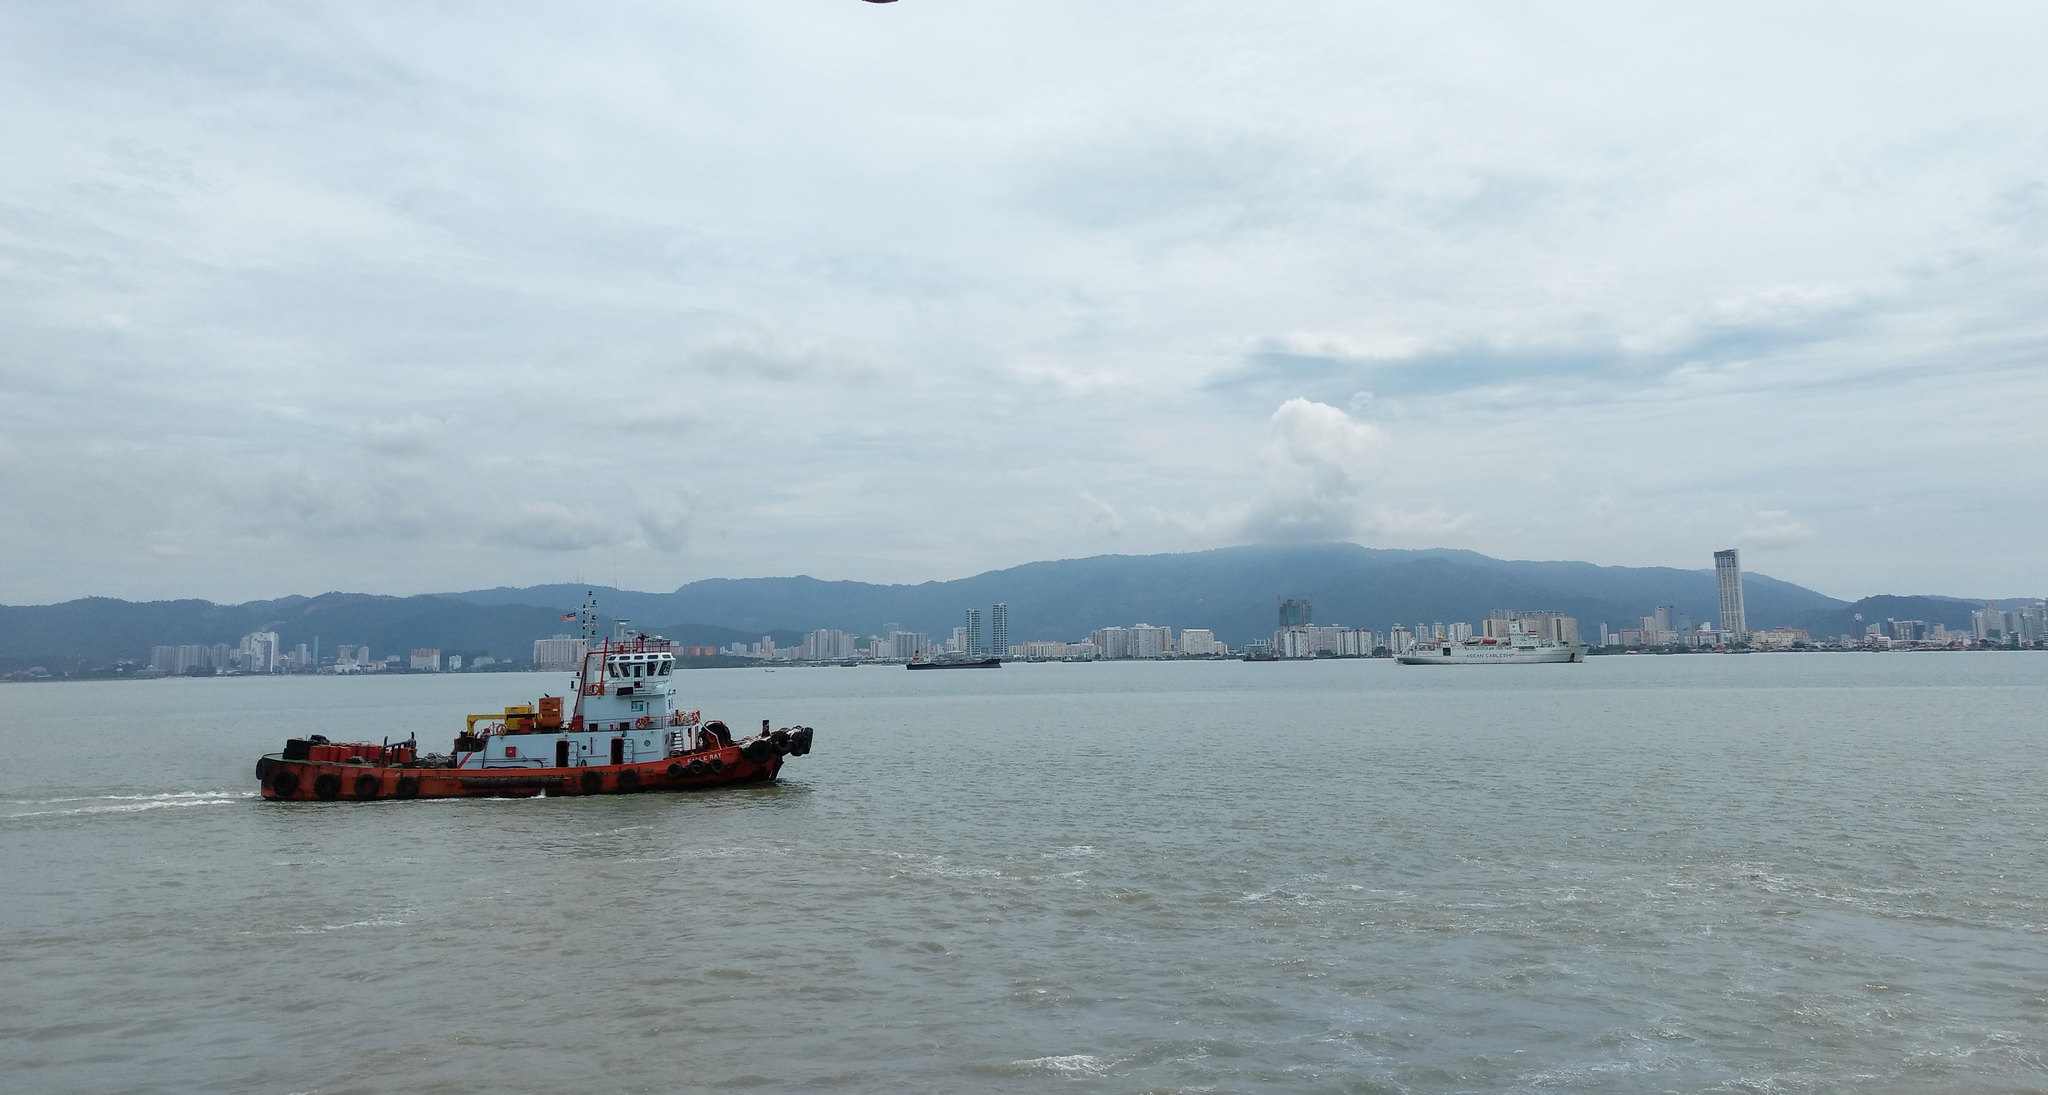 George Town as seen from the ferry - Penang, Malaysia